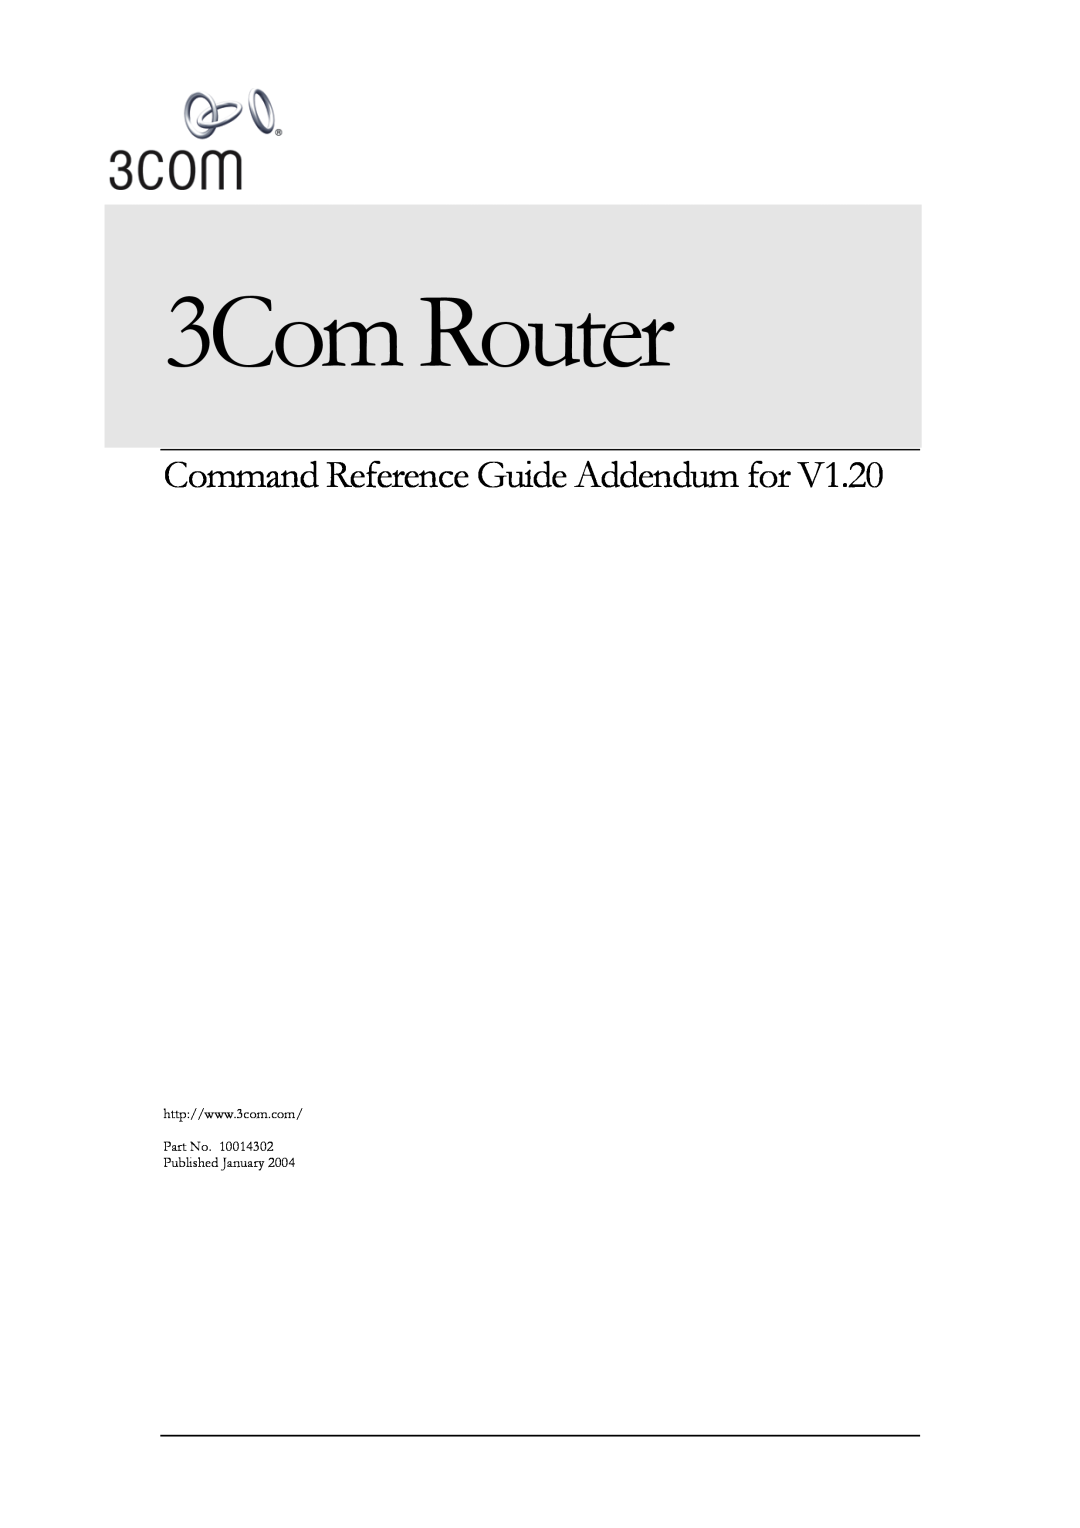 3Com 10014302 manual 3Com Router, Command Reference Guide Addendum for, Published January 